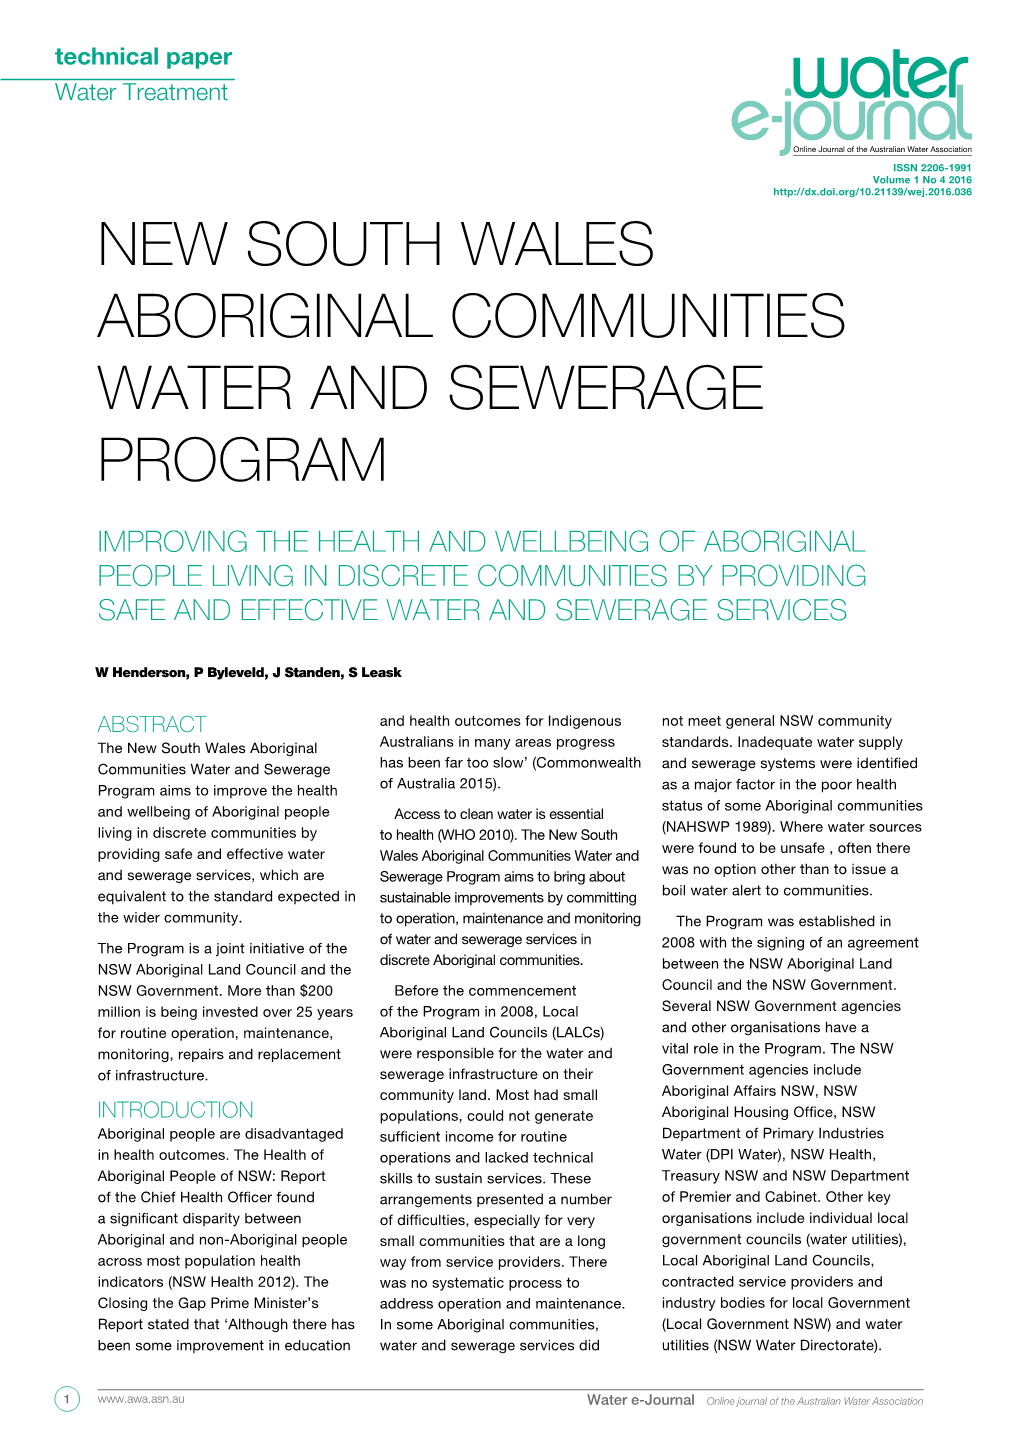 New South Wales Aboriginal Communities Water and Sewerage Program